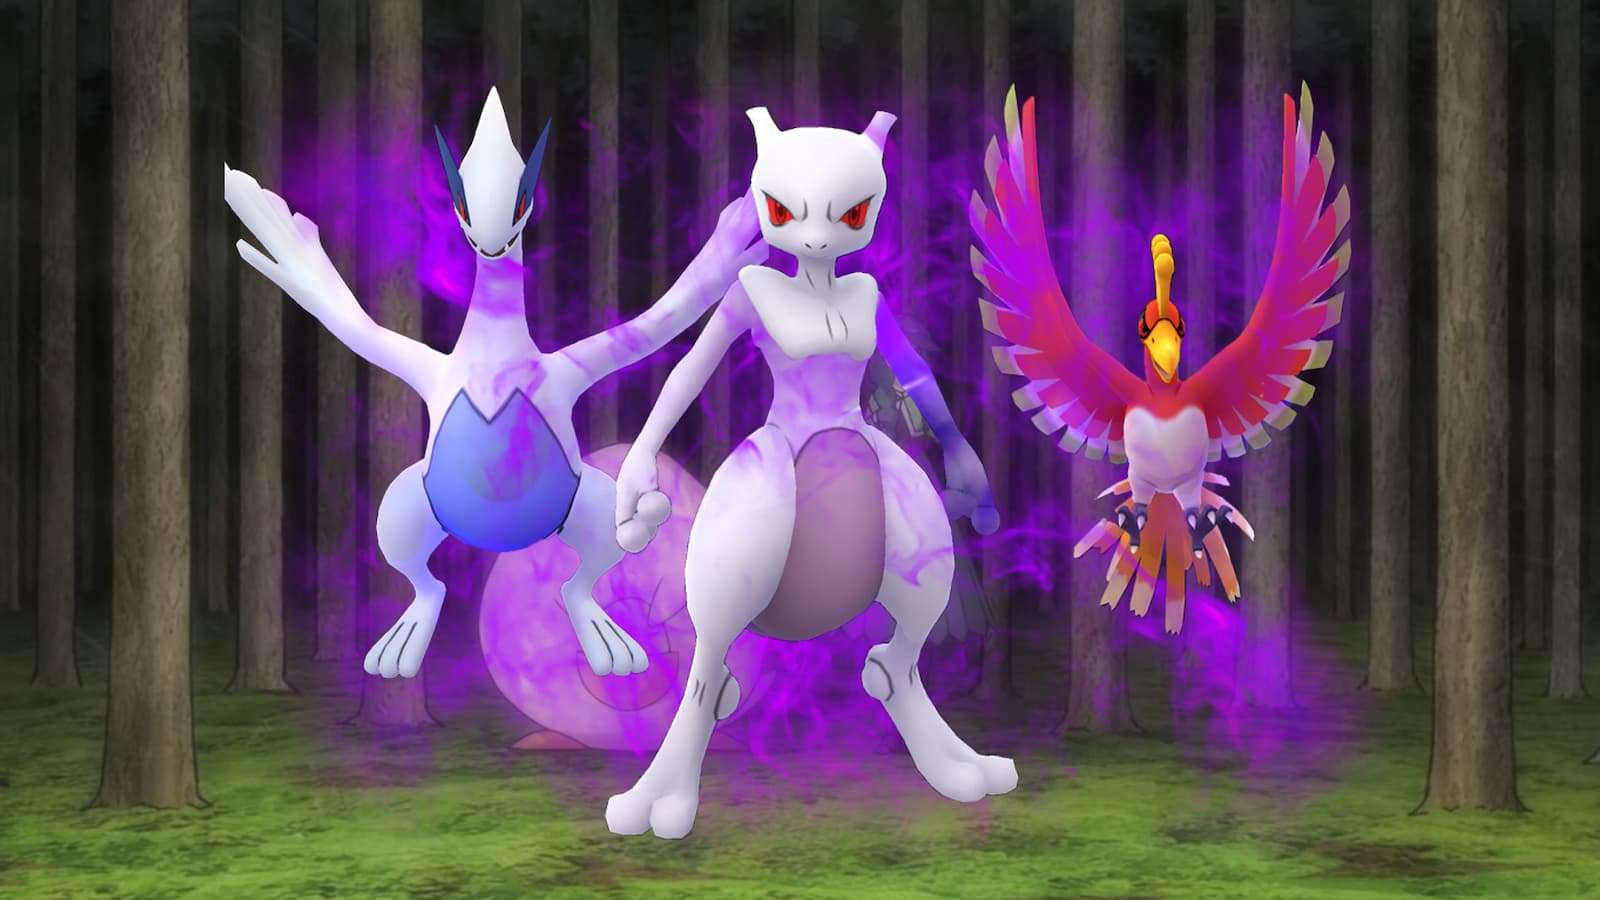 Shadow Mewtwo Ho-oh and Lugia from Pokemon Go